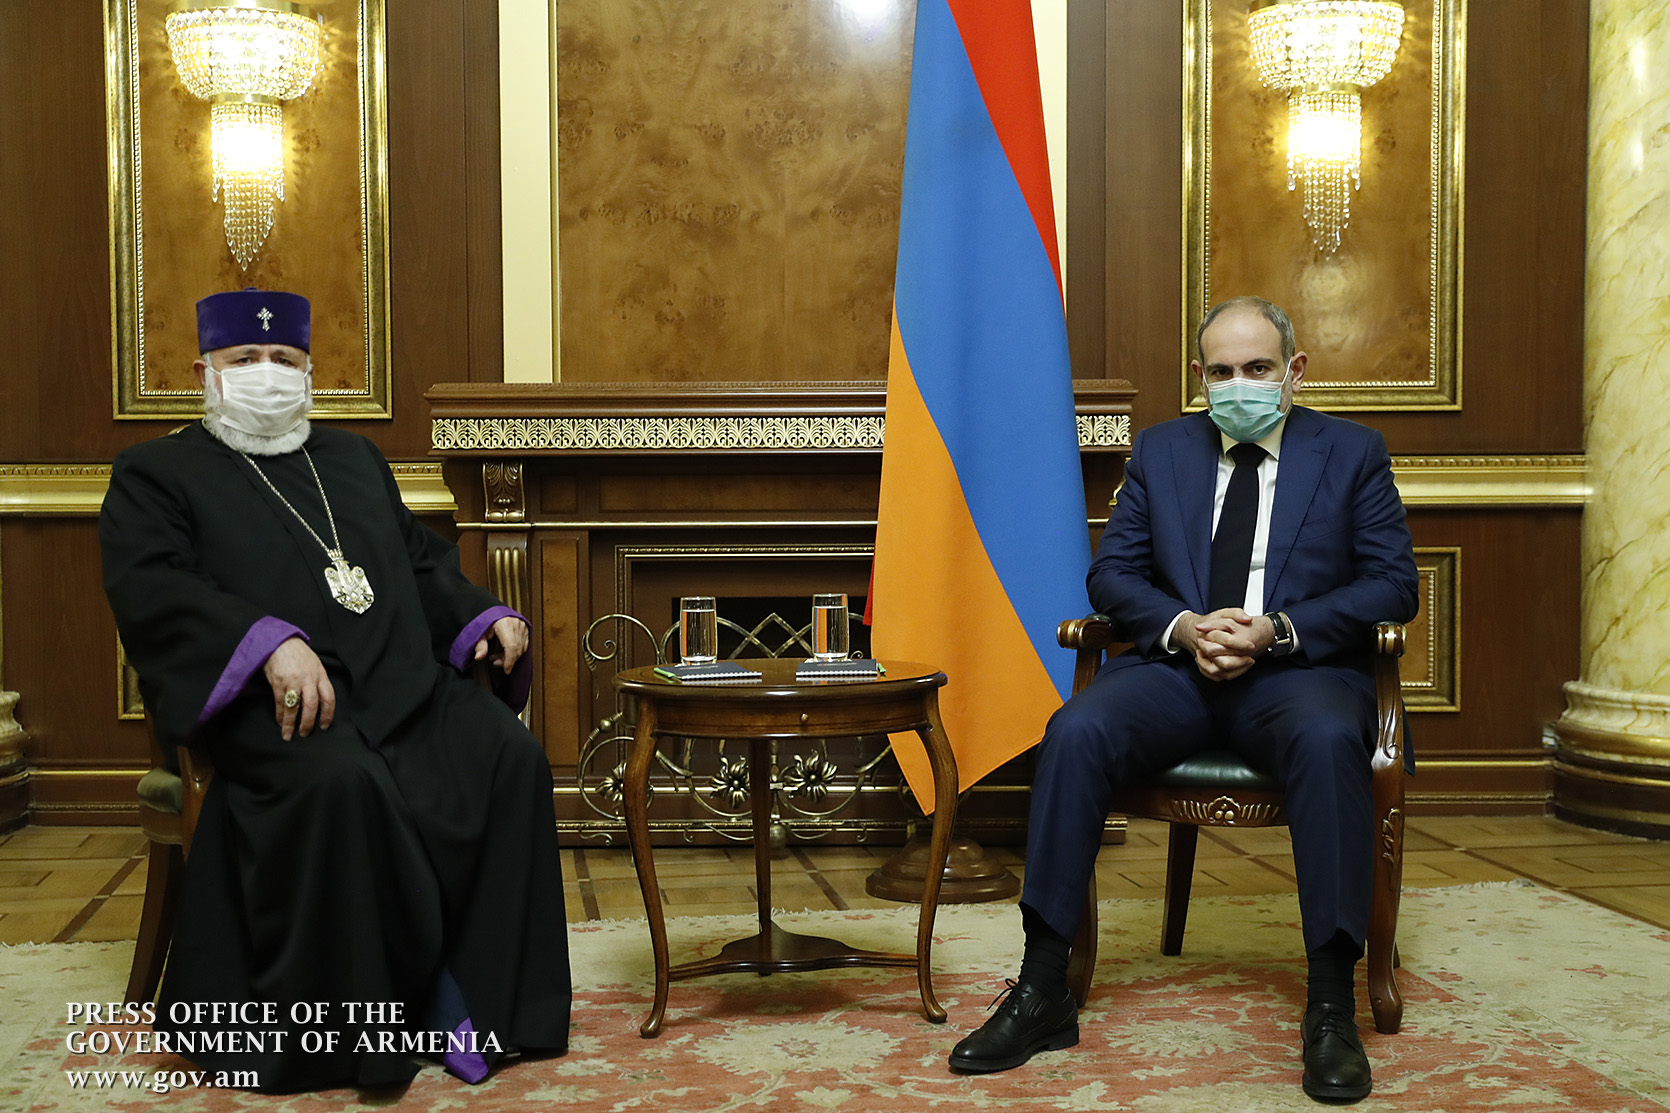 Prime Minister Pashinyan meets with Catholicos of All Armenians